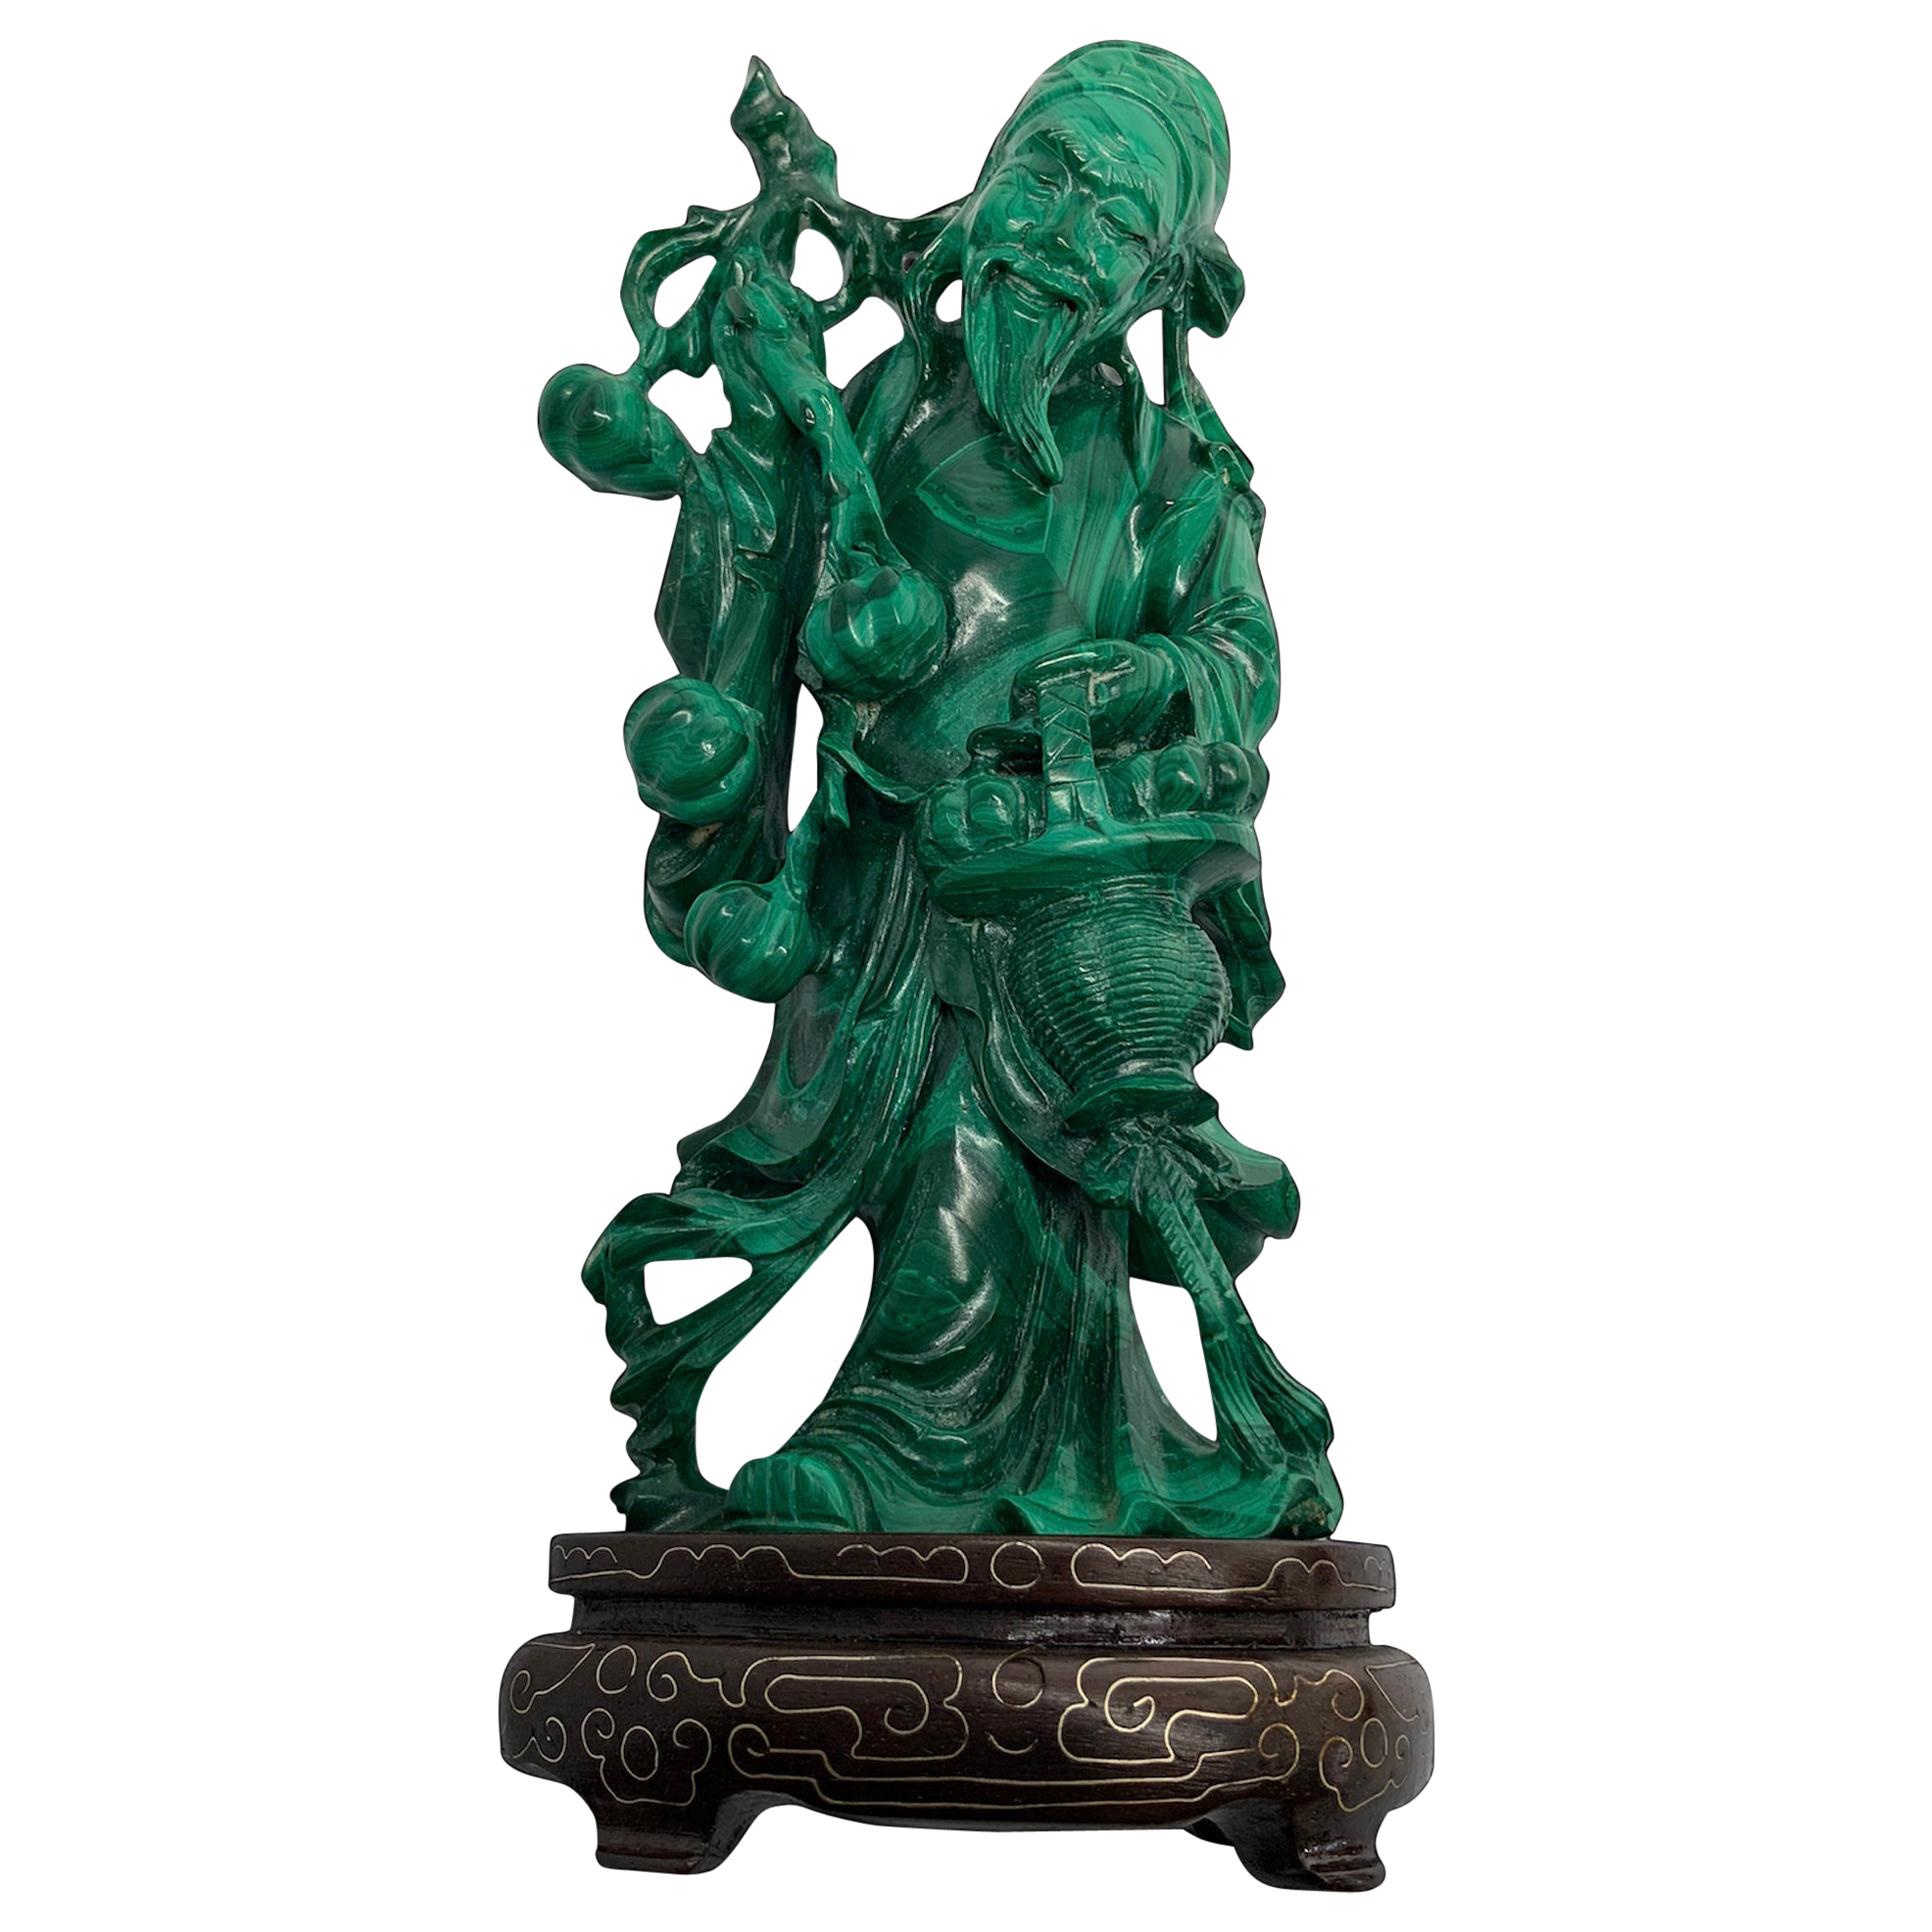 Hand Carved Malachite Statue of Shou Xing Gong